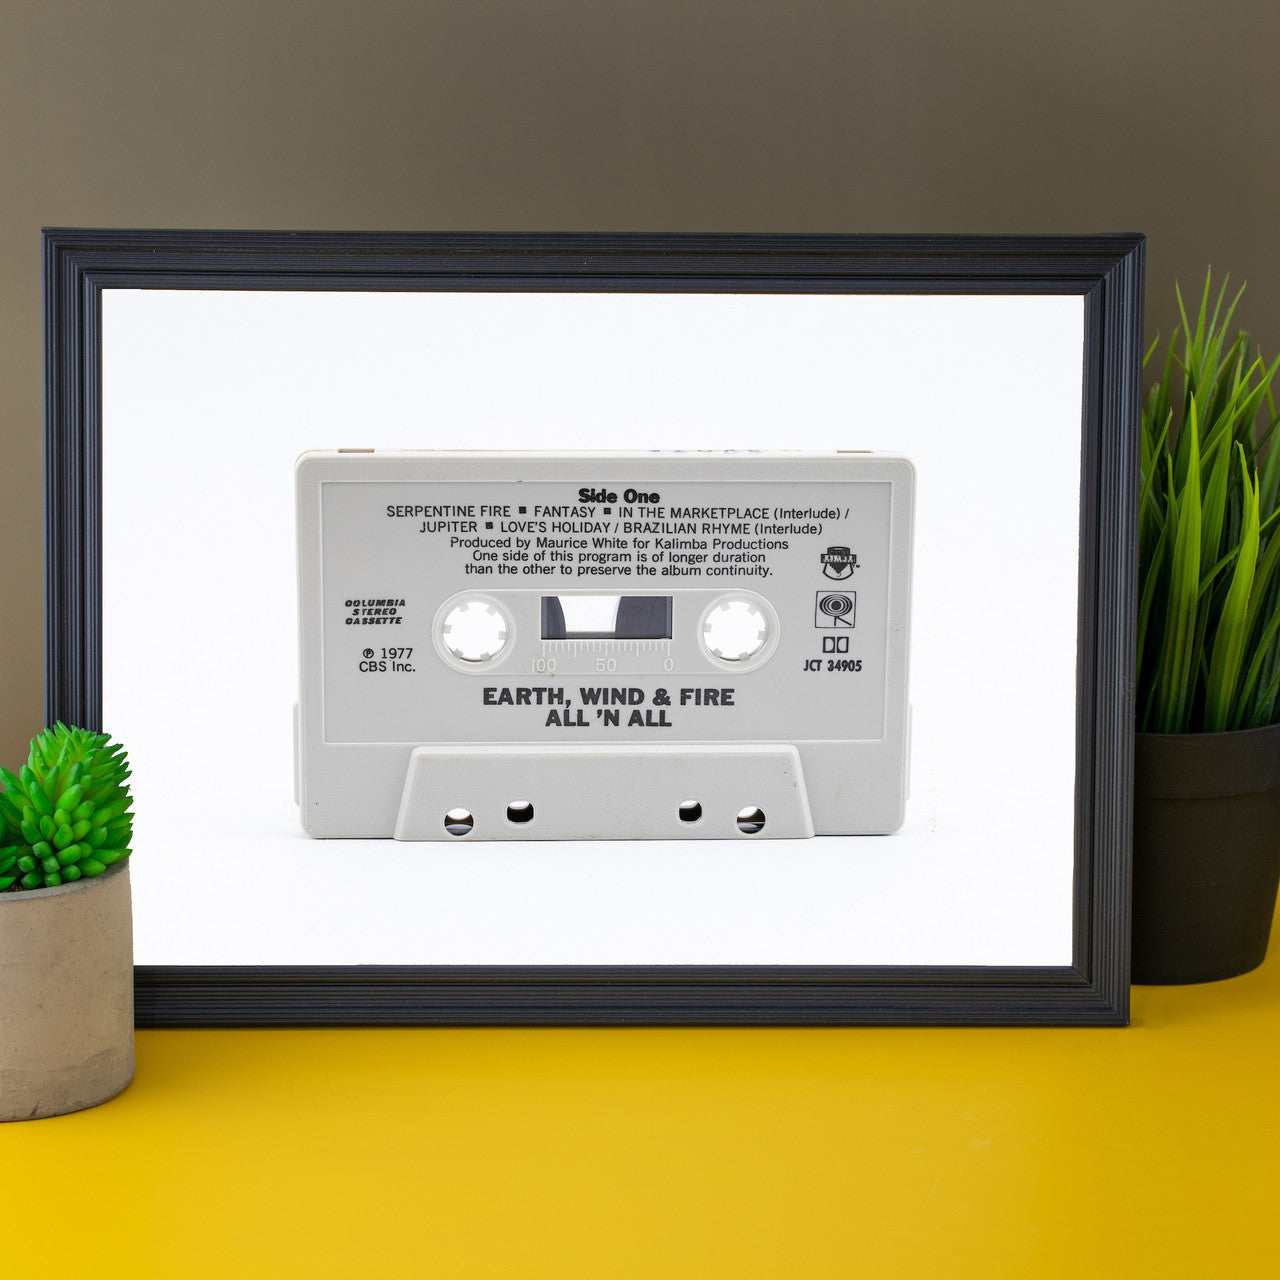 Modern art photo of the cassette of "Earth, Wind & Fire All 'N All" displayed in your office